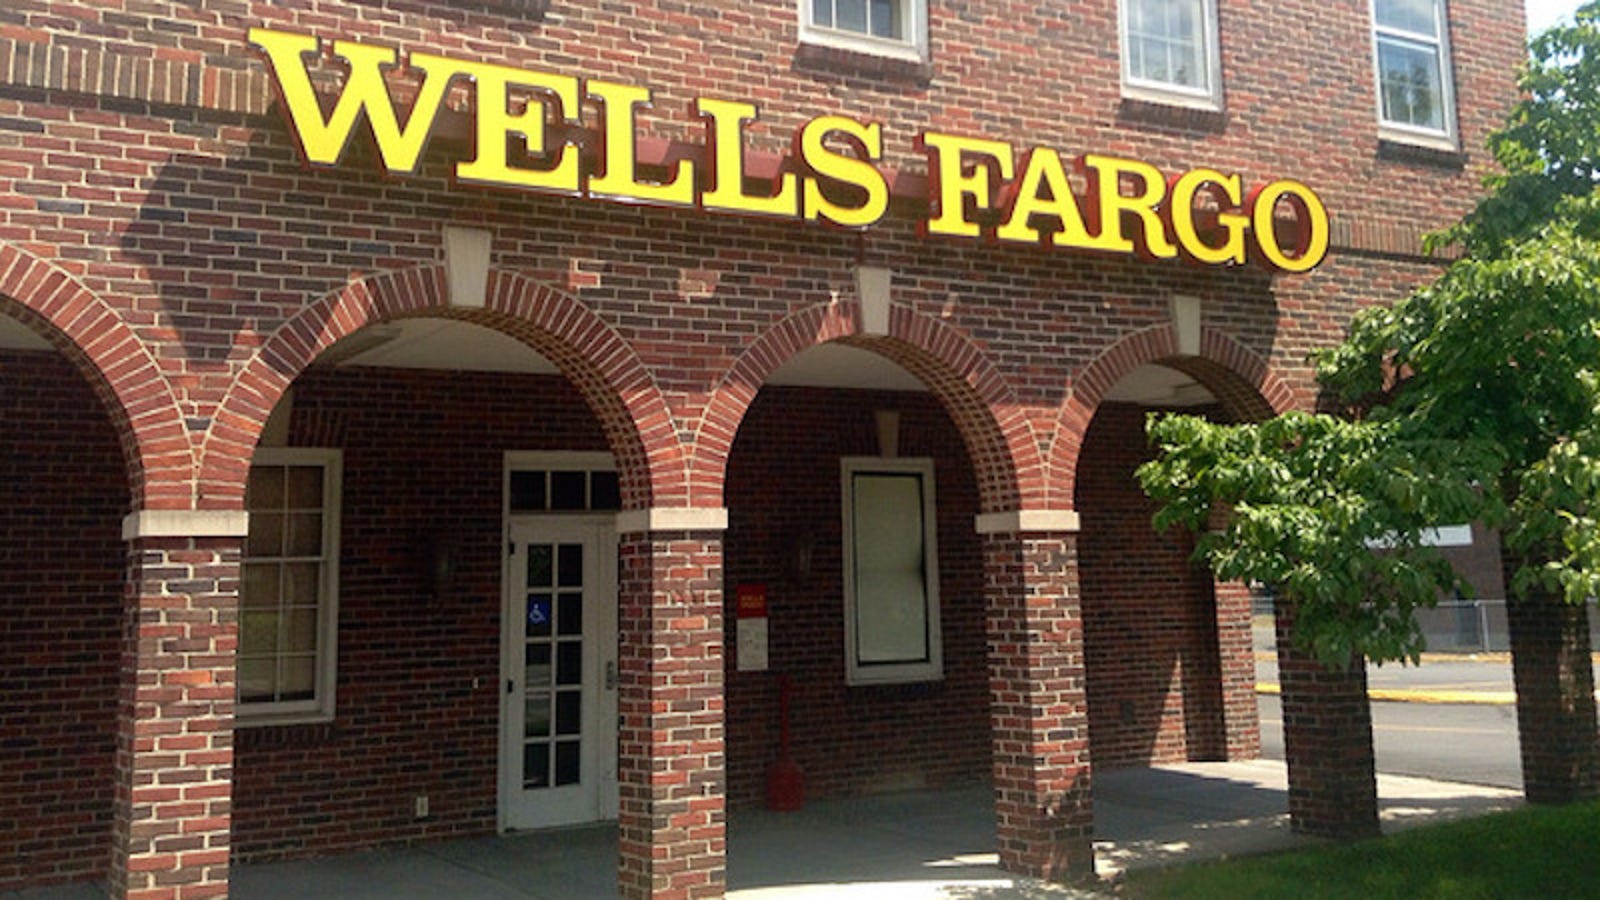 What You Should Know If You Think Wells Fargo Ripped You Off